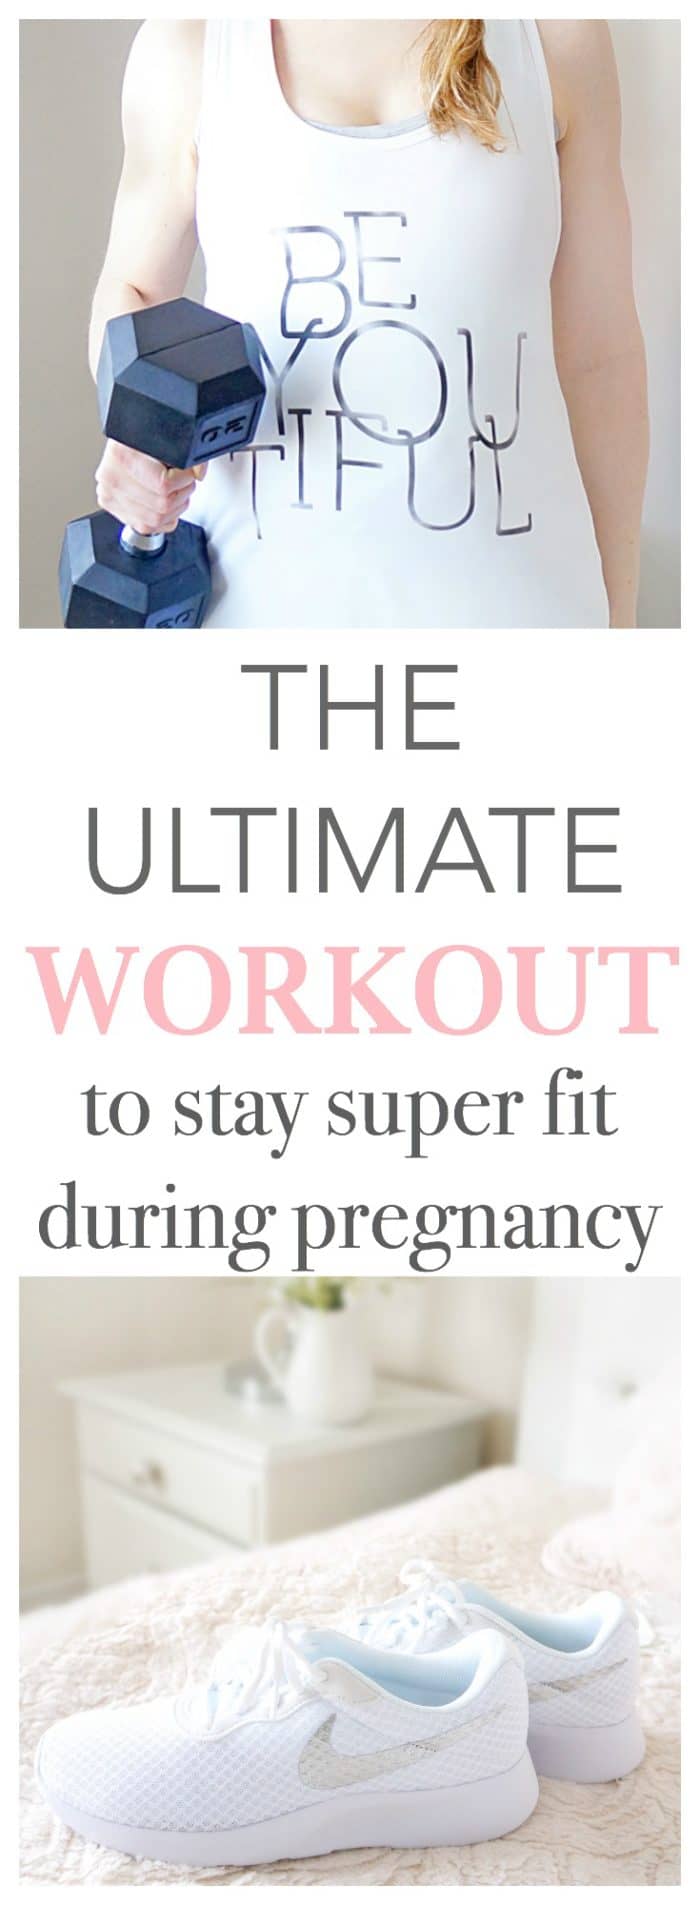 Collage with text: The Ultimate Workout to stay super fit during pregnancy